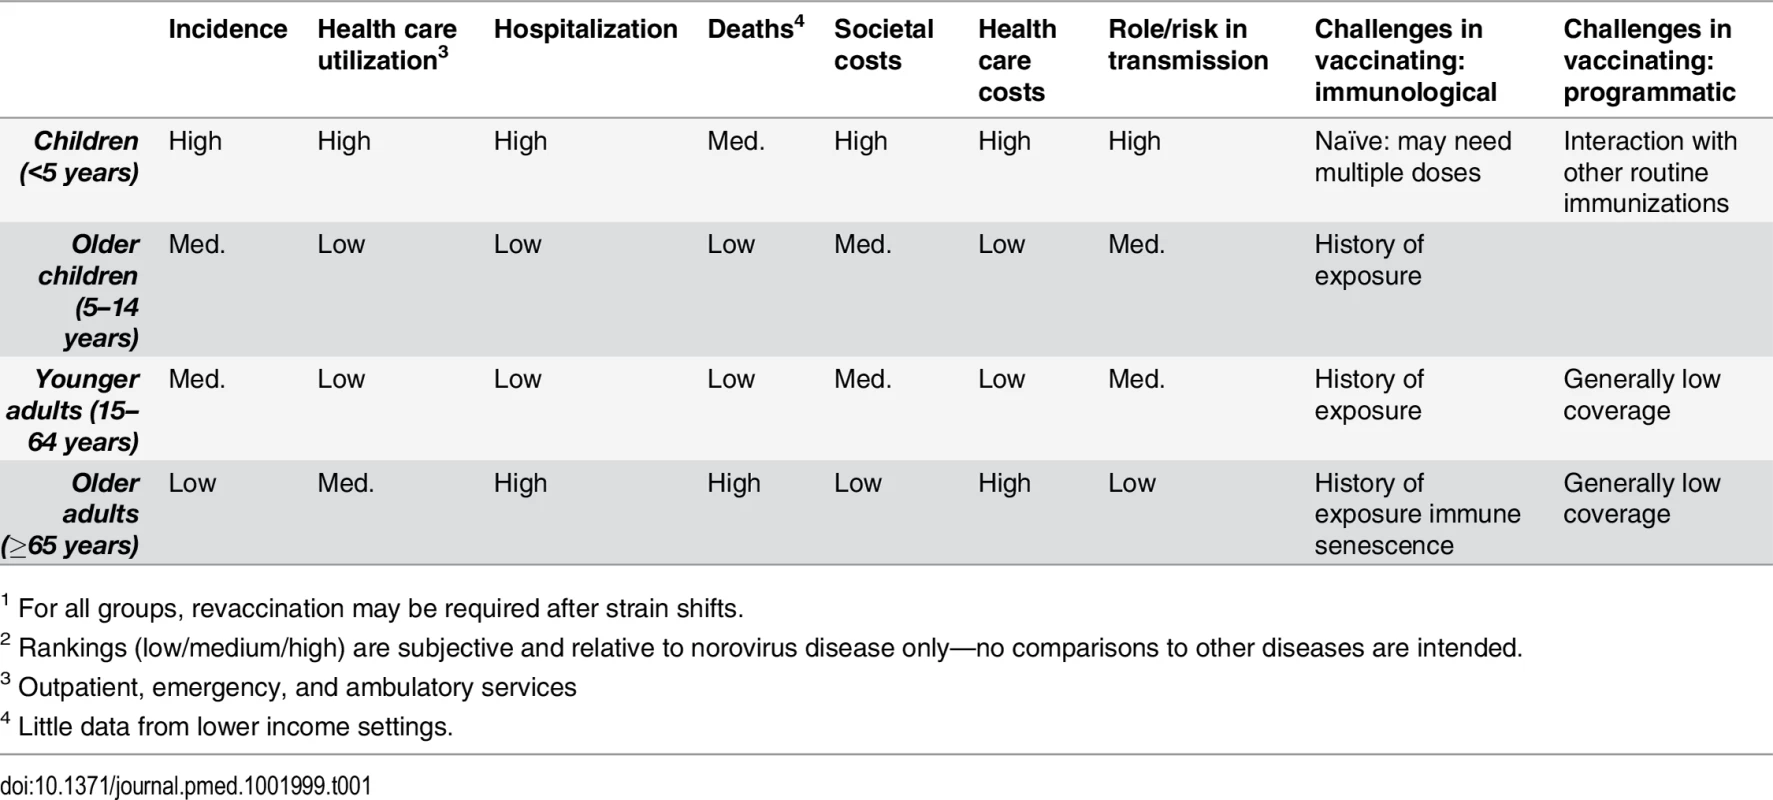 Epidemiological and economics characteristics of various age groups for considering norovirus vaccines<em class=&quot;ref&quot;><sup>1</sup></em><sup>,</sup><em class=&quot;ref&quot;><sup>2</sup></em>.